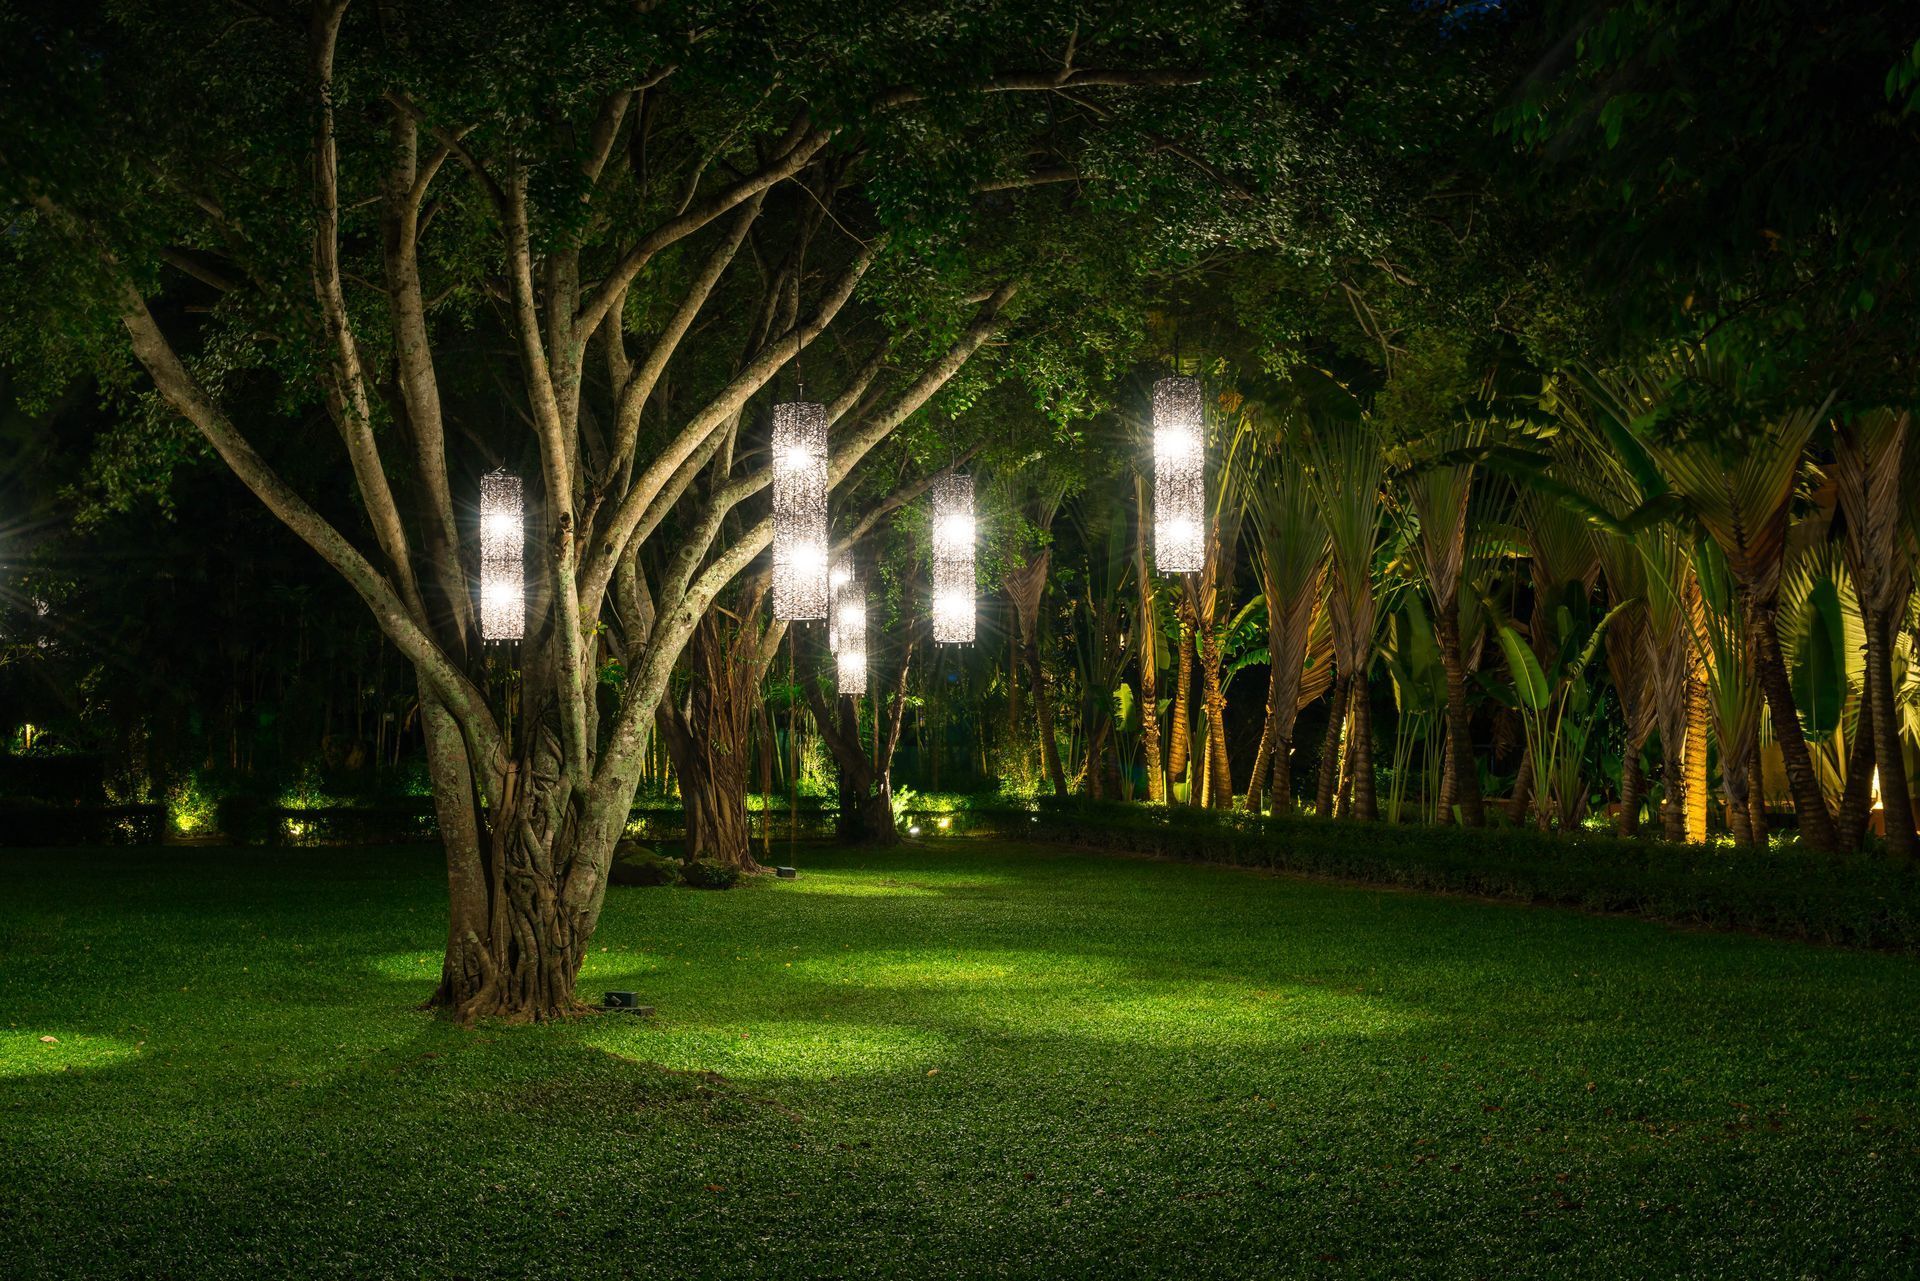 a park is lit up at night with lanterns hanging from the trees .